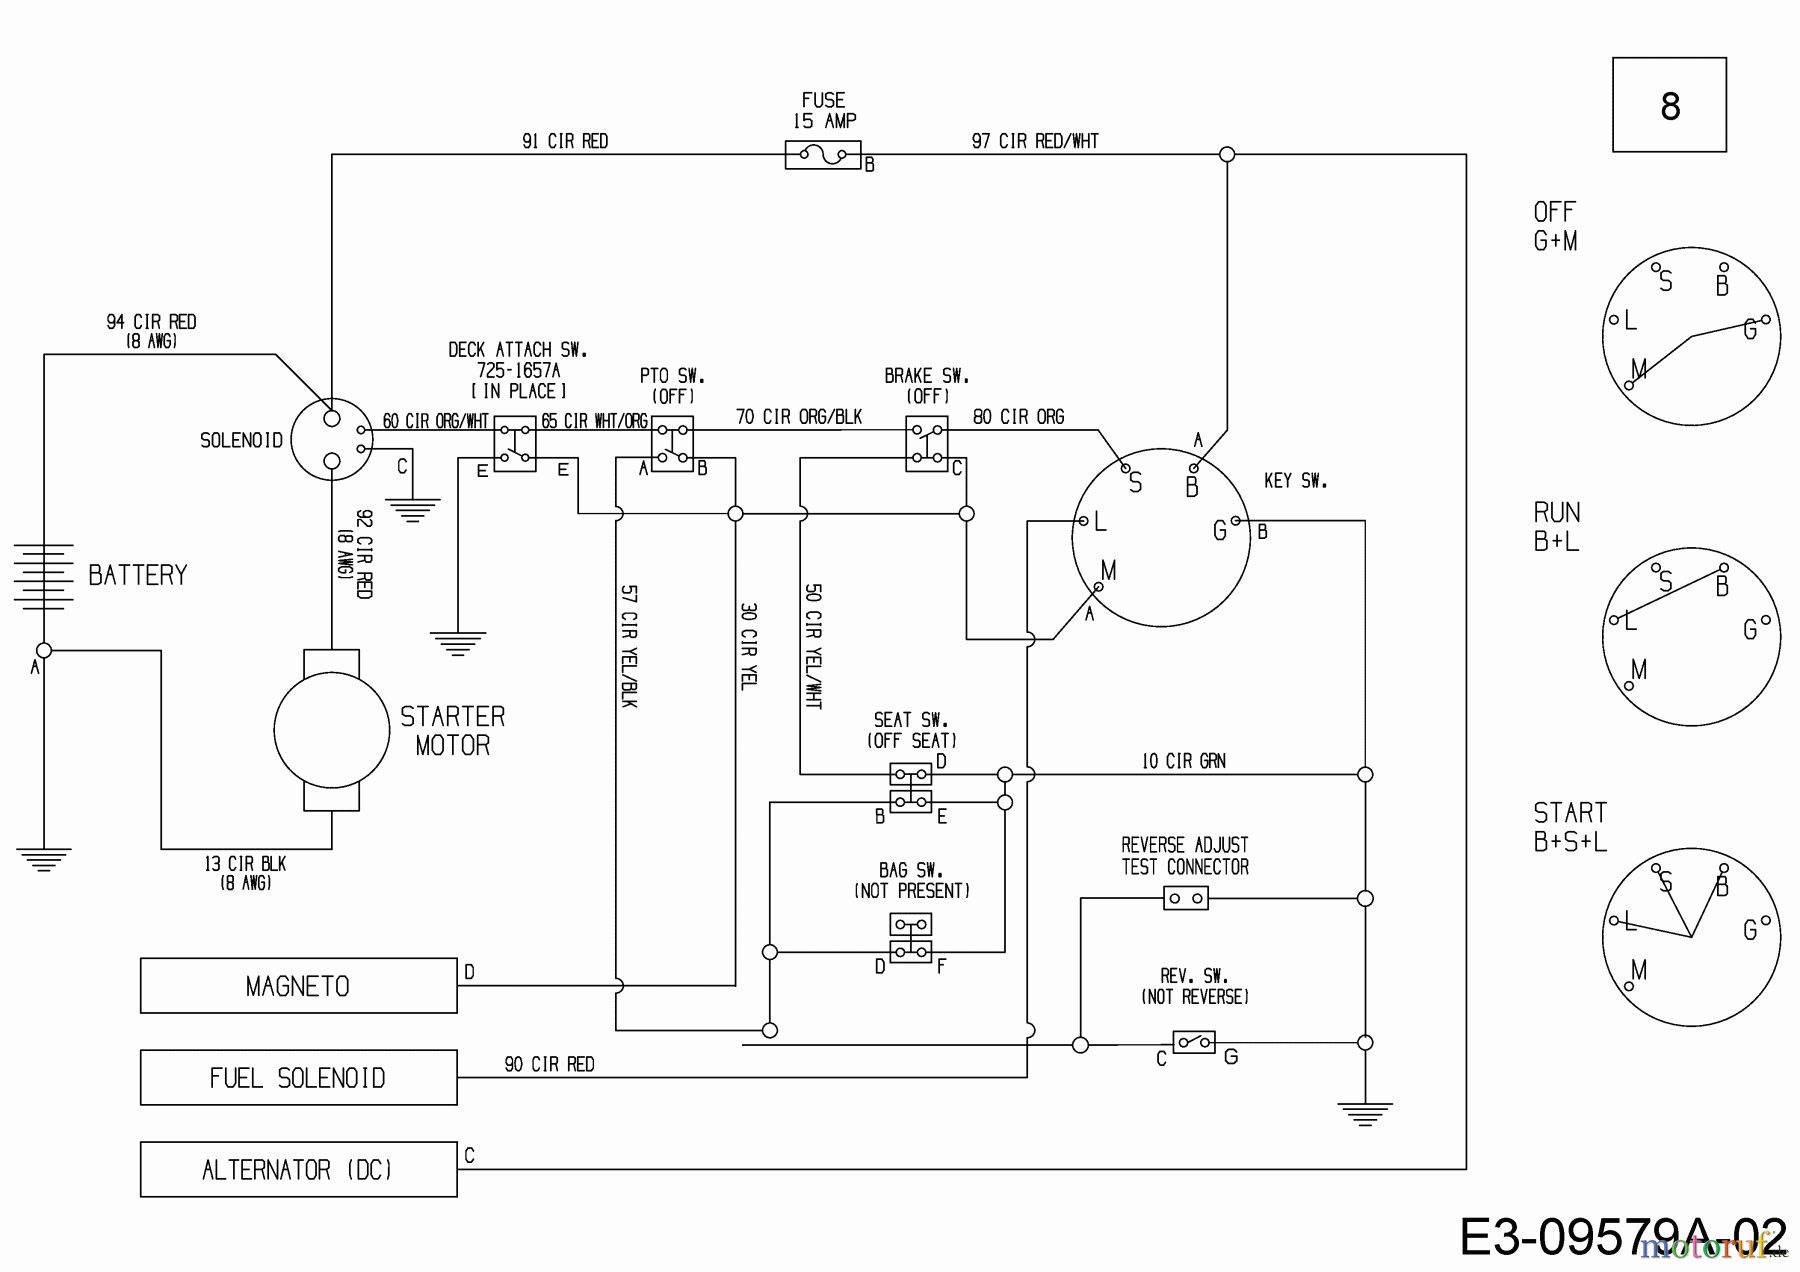  Wolf-Garten Lawn tractors Scooter Hydro 13A221SD650  (2017) Wiring diagram